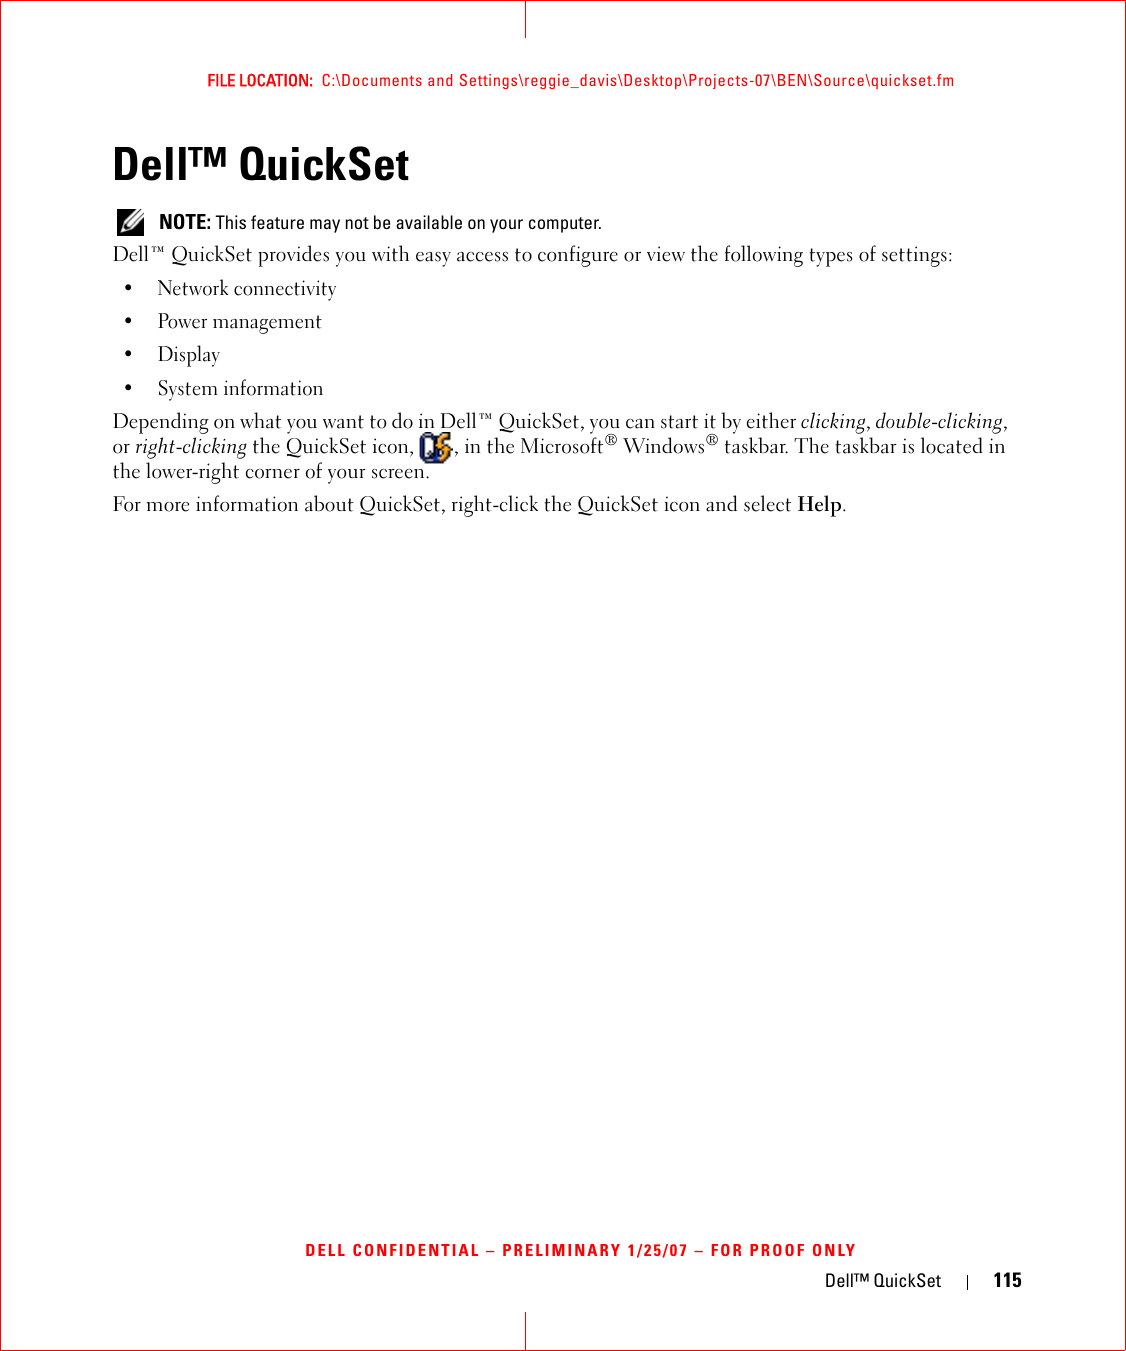 Dell™ QuickSet 115FILE LOCATION:  C:\Documents and Settings\reggie_davis\Desktop\Projects-07\BEN\Source\quickset.fmDELL CONFIDENTIAL – PRELIMINARY 1/25/07 – FOR PROOF ONLYDell™ QuickSet NOTE: This feature may not be available on your computer.Dell™ QuickSet provides you with easy access to configure or view the following types of settings:• Network connectivity• Power management•Display• System informationDepending on what you want to do in Dell™ QuickSet, you can start it by either clicking, double-clicking, or right-clicking the QuickSet icon,  , in the Microsoft® Windows® taskbar. The taskbar is located in the lower-right corner of your screen.For more information about QuickSet, right-click the QuickSet icon and select Help.